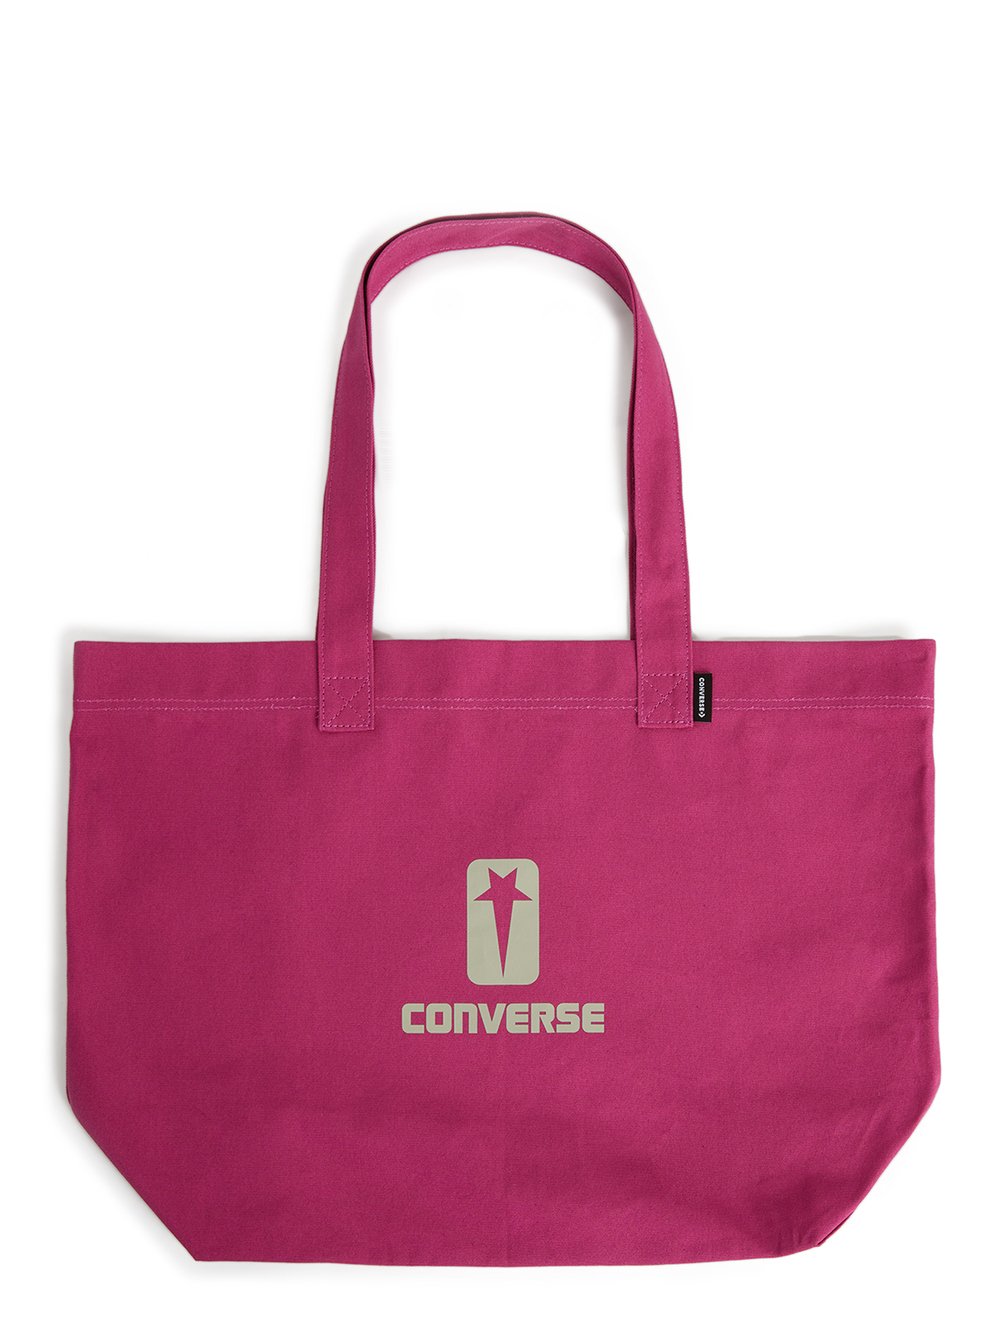 CONVERSE X DRKSHDW TOTE IN HOT PINK